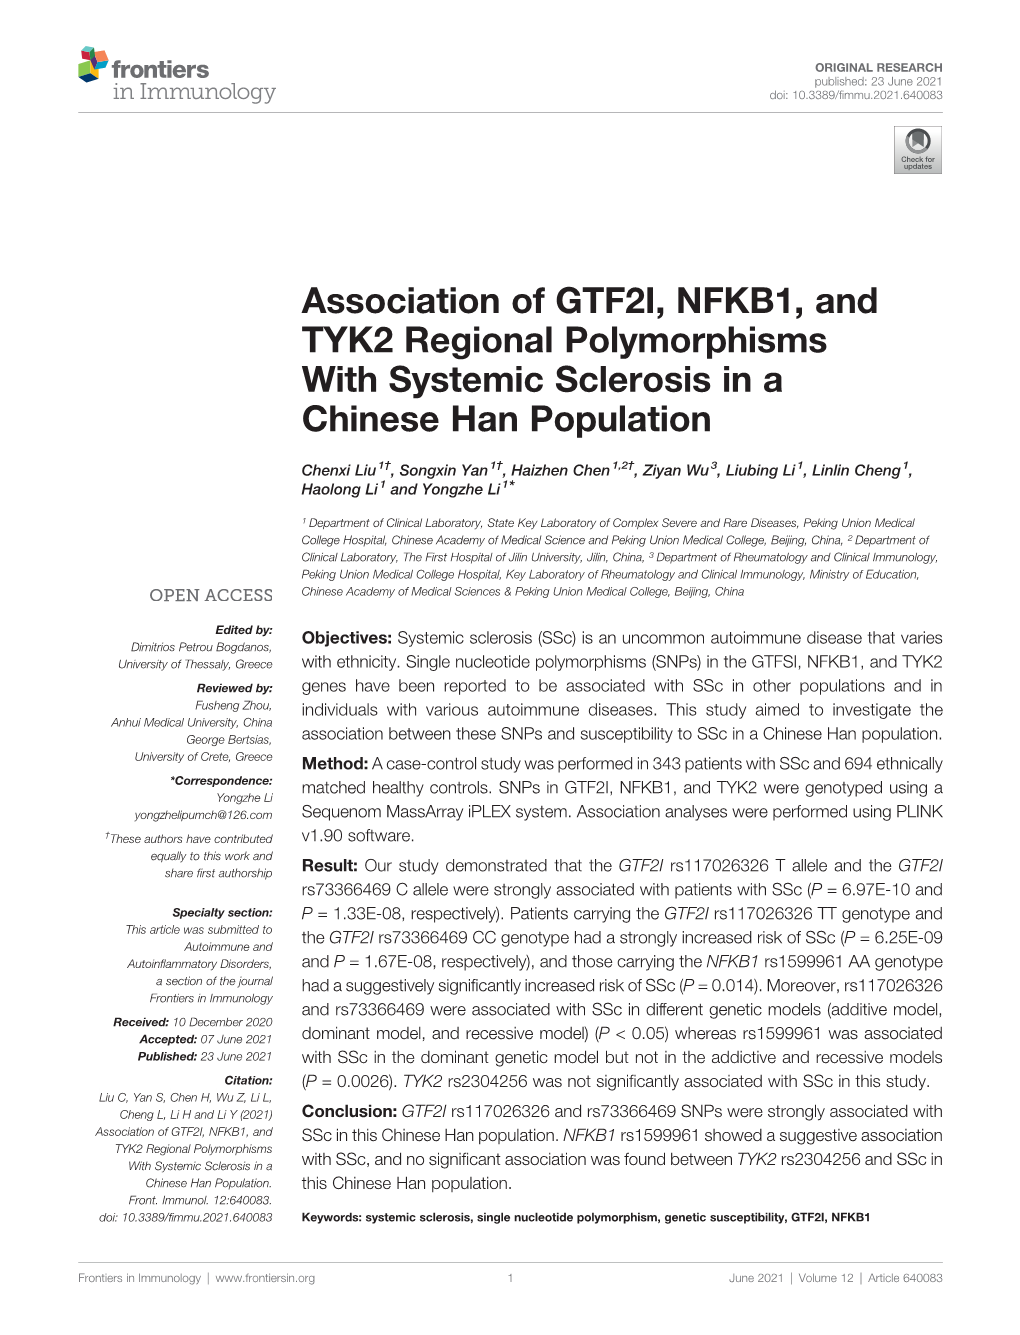 Association of GTF2I, NFKB1, and TYK2 Regional Polymorphisms with Systemic Sclerosis in a Chinese Han Population